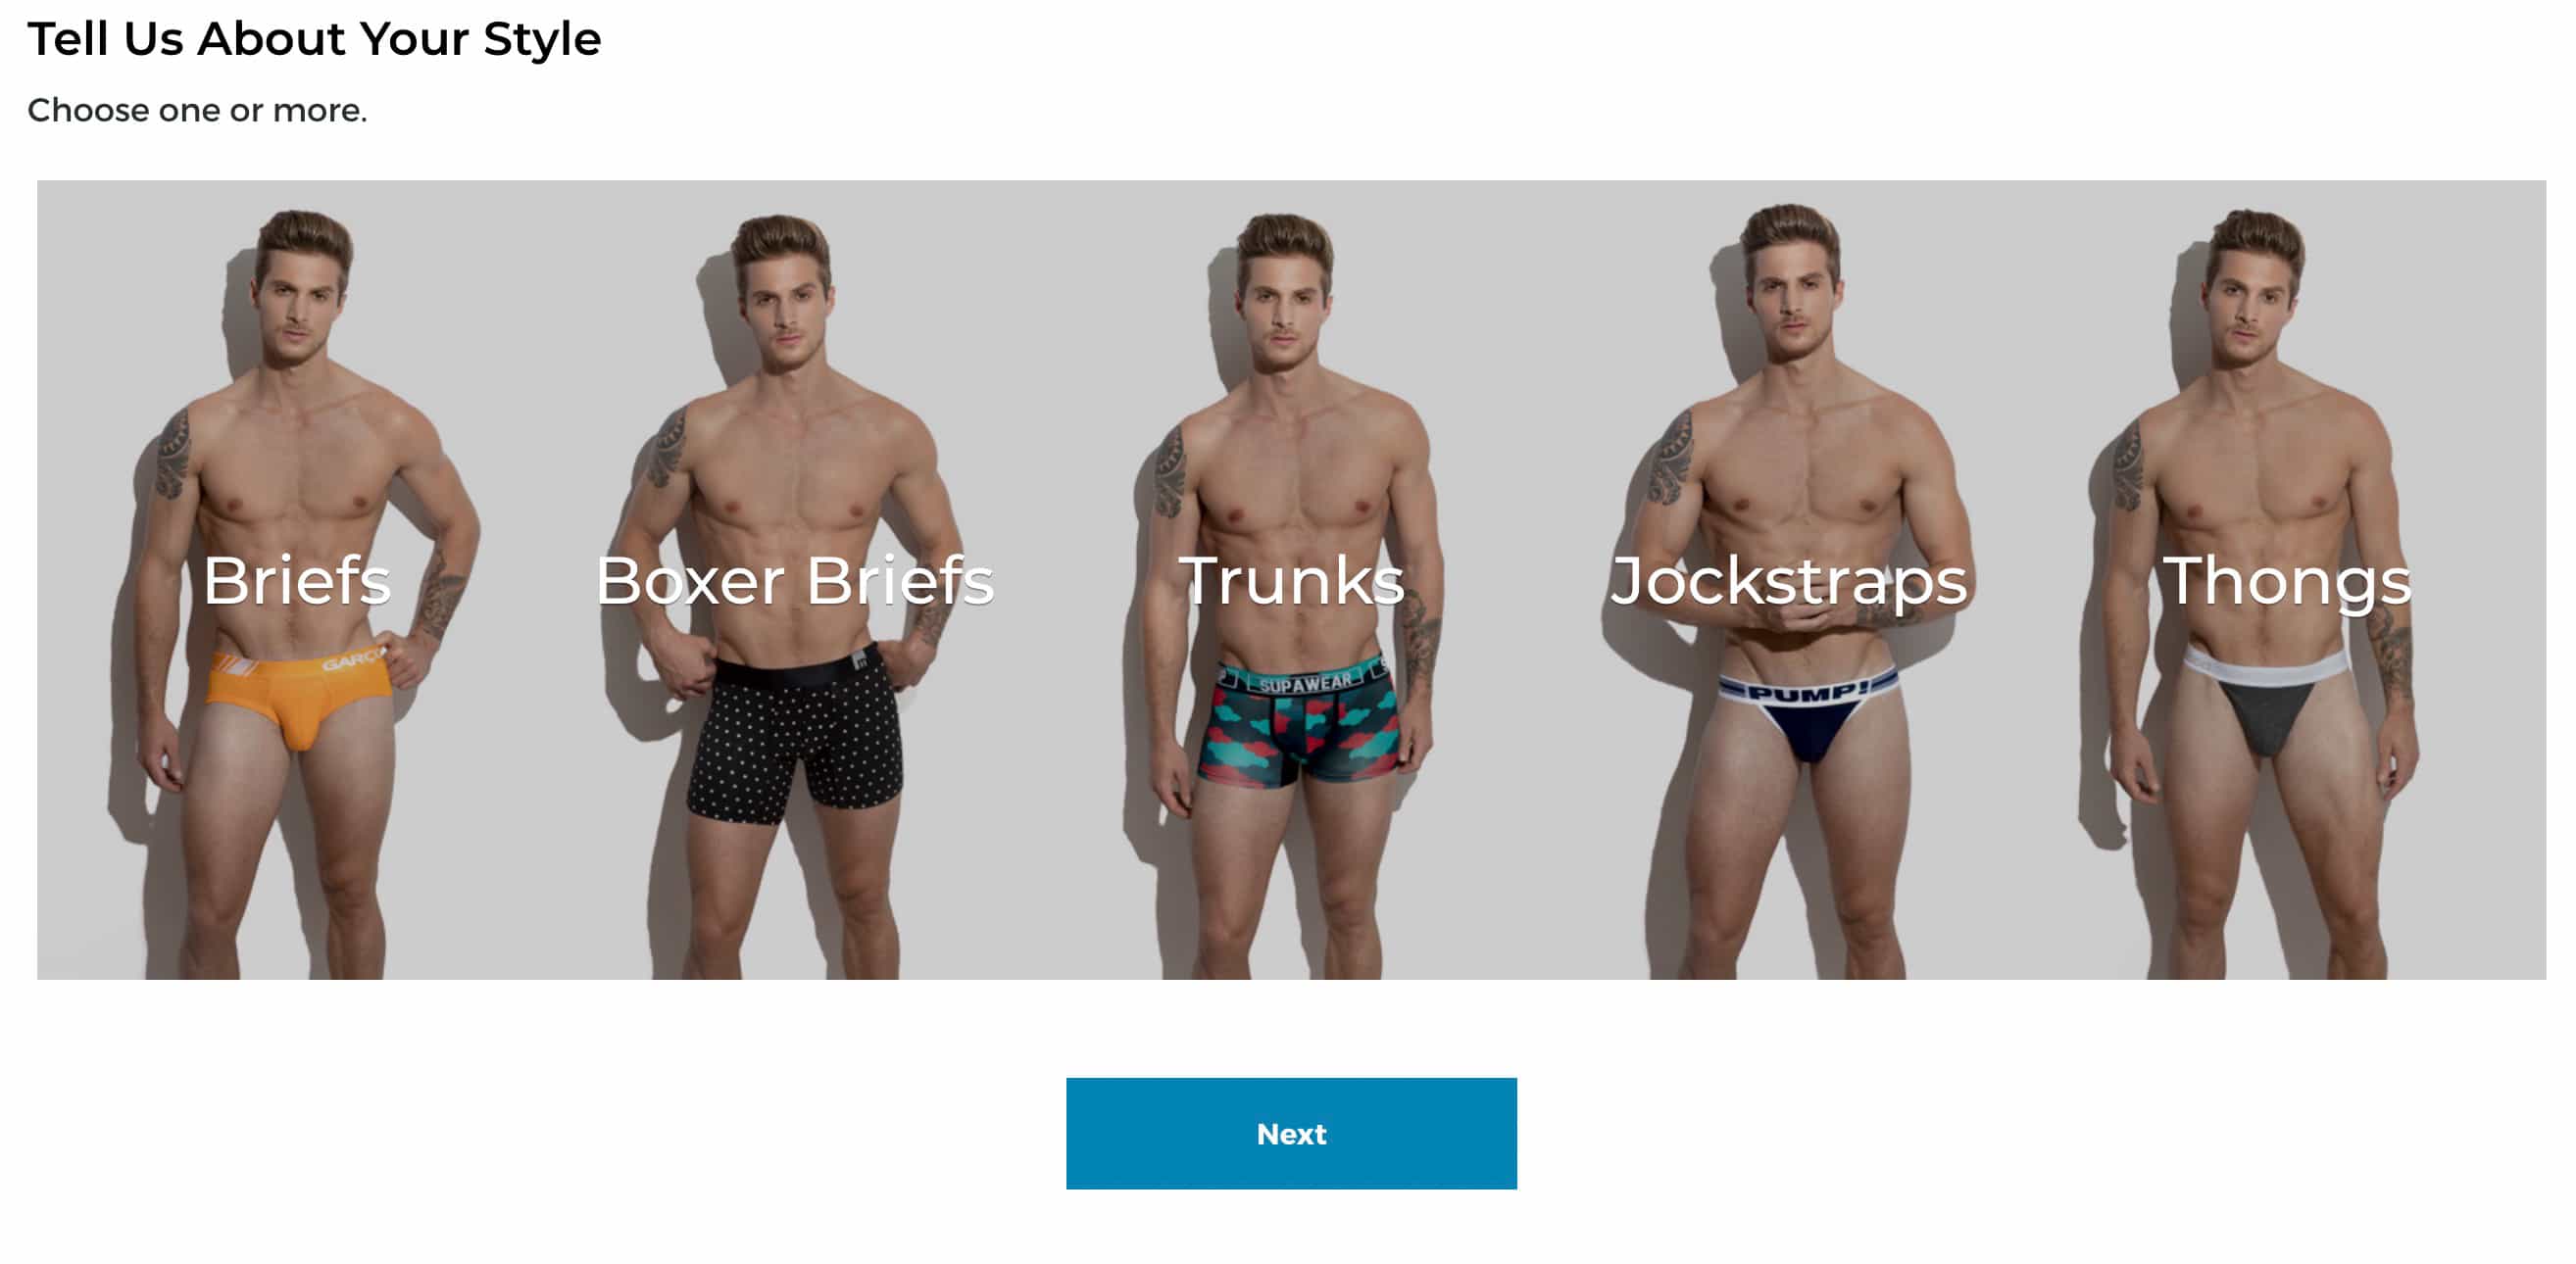 underwearexpert has got some exciting new products! They sent me